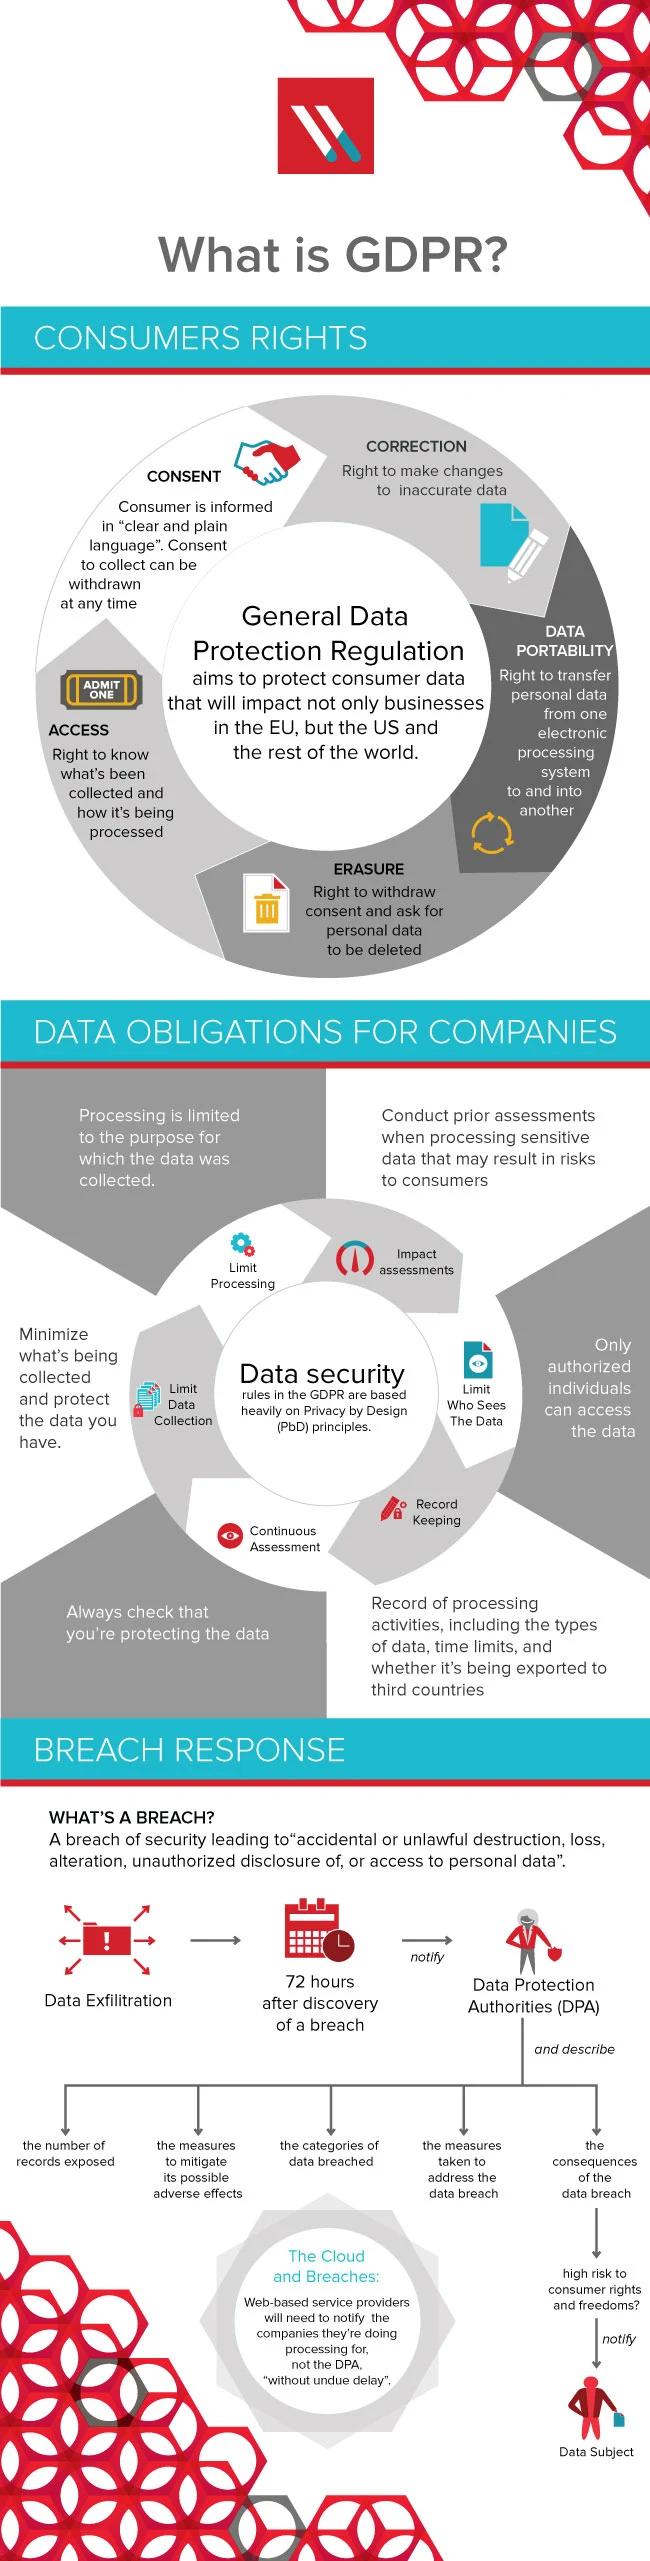 GDPR – Consumer Rights, Data Obligations and Breach Responses This infographic nicely captures GDPR, explaining the 3 key areas:  Consumer Rights Data Obligations for Companies Breach Response